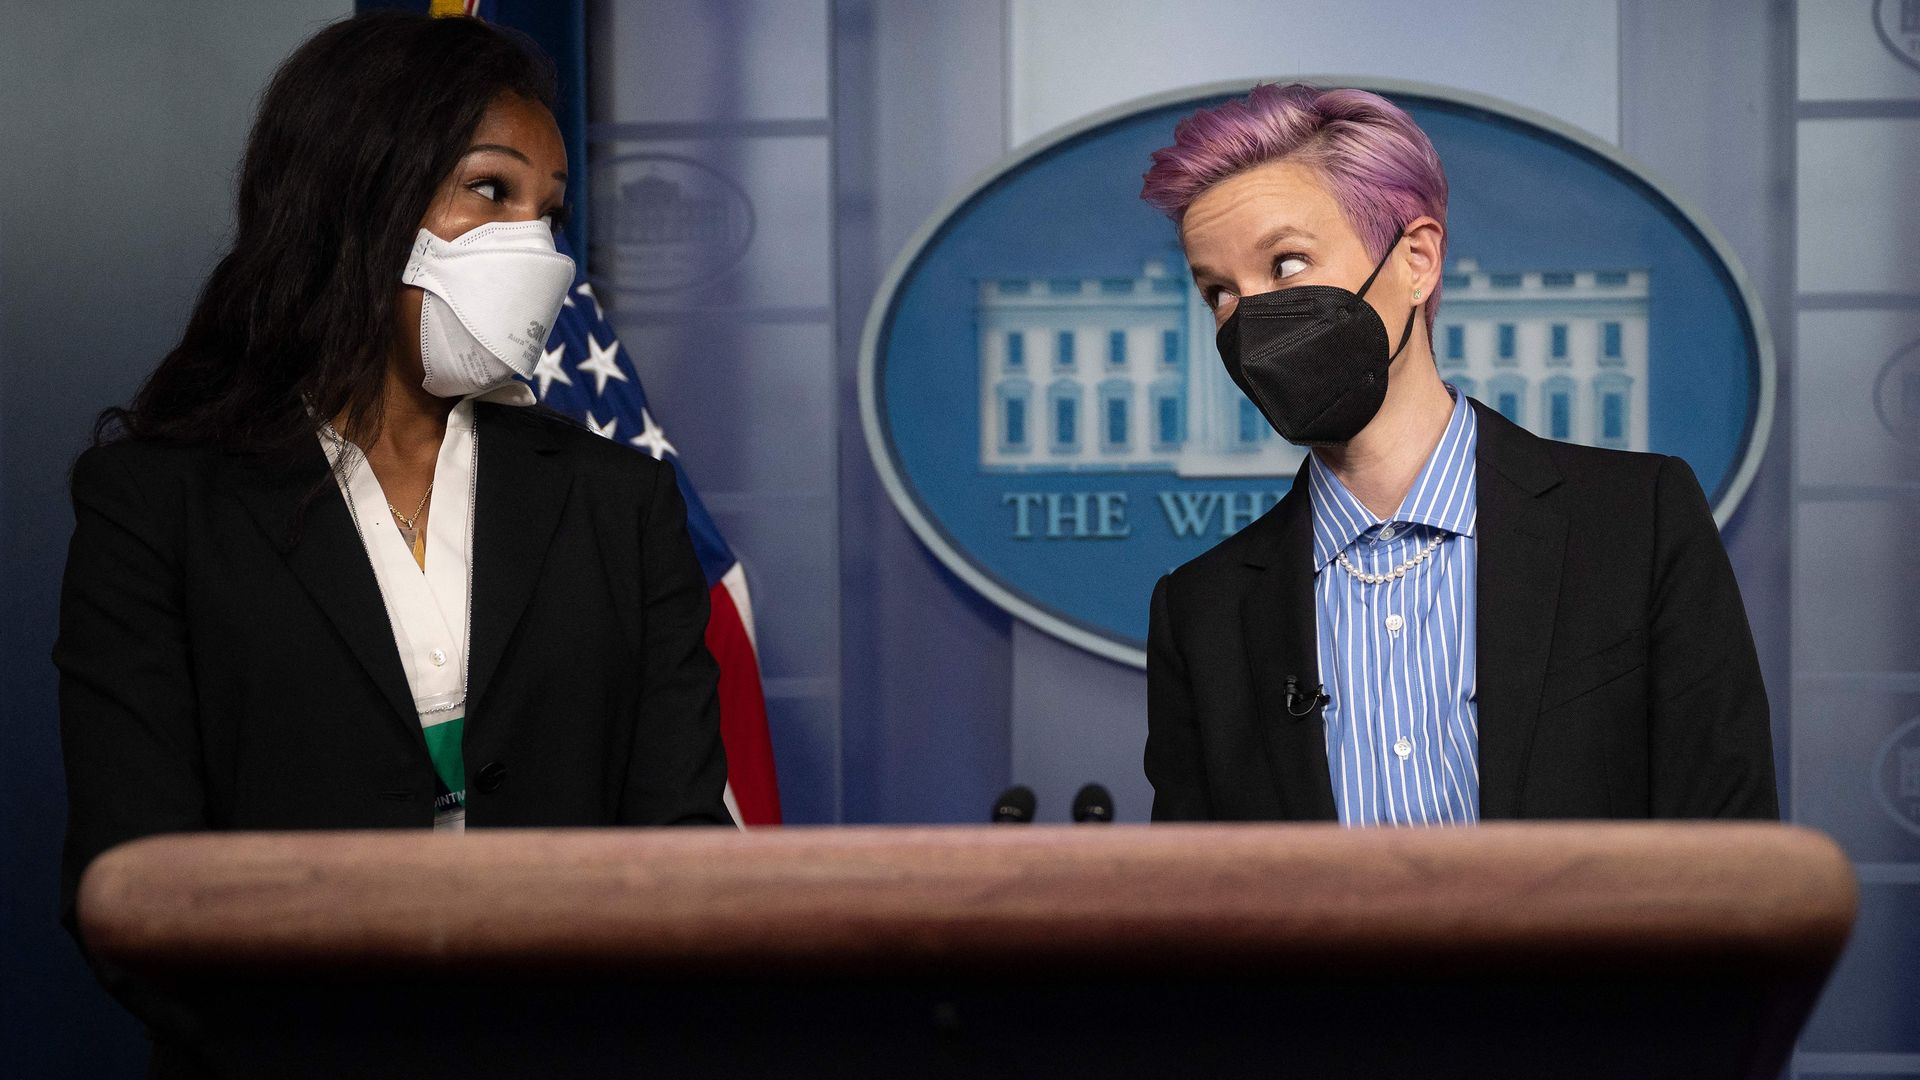 U.S. Women's National Soccer Team members Margaret Purce and Megan Rapinoe appear in the Briefing Room before an Equal Pay Day event at the White House.